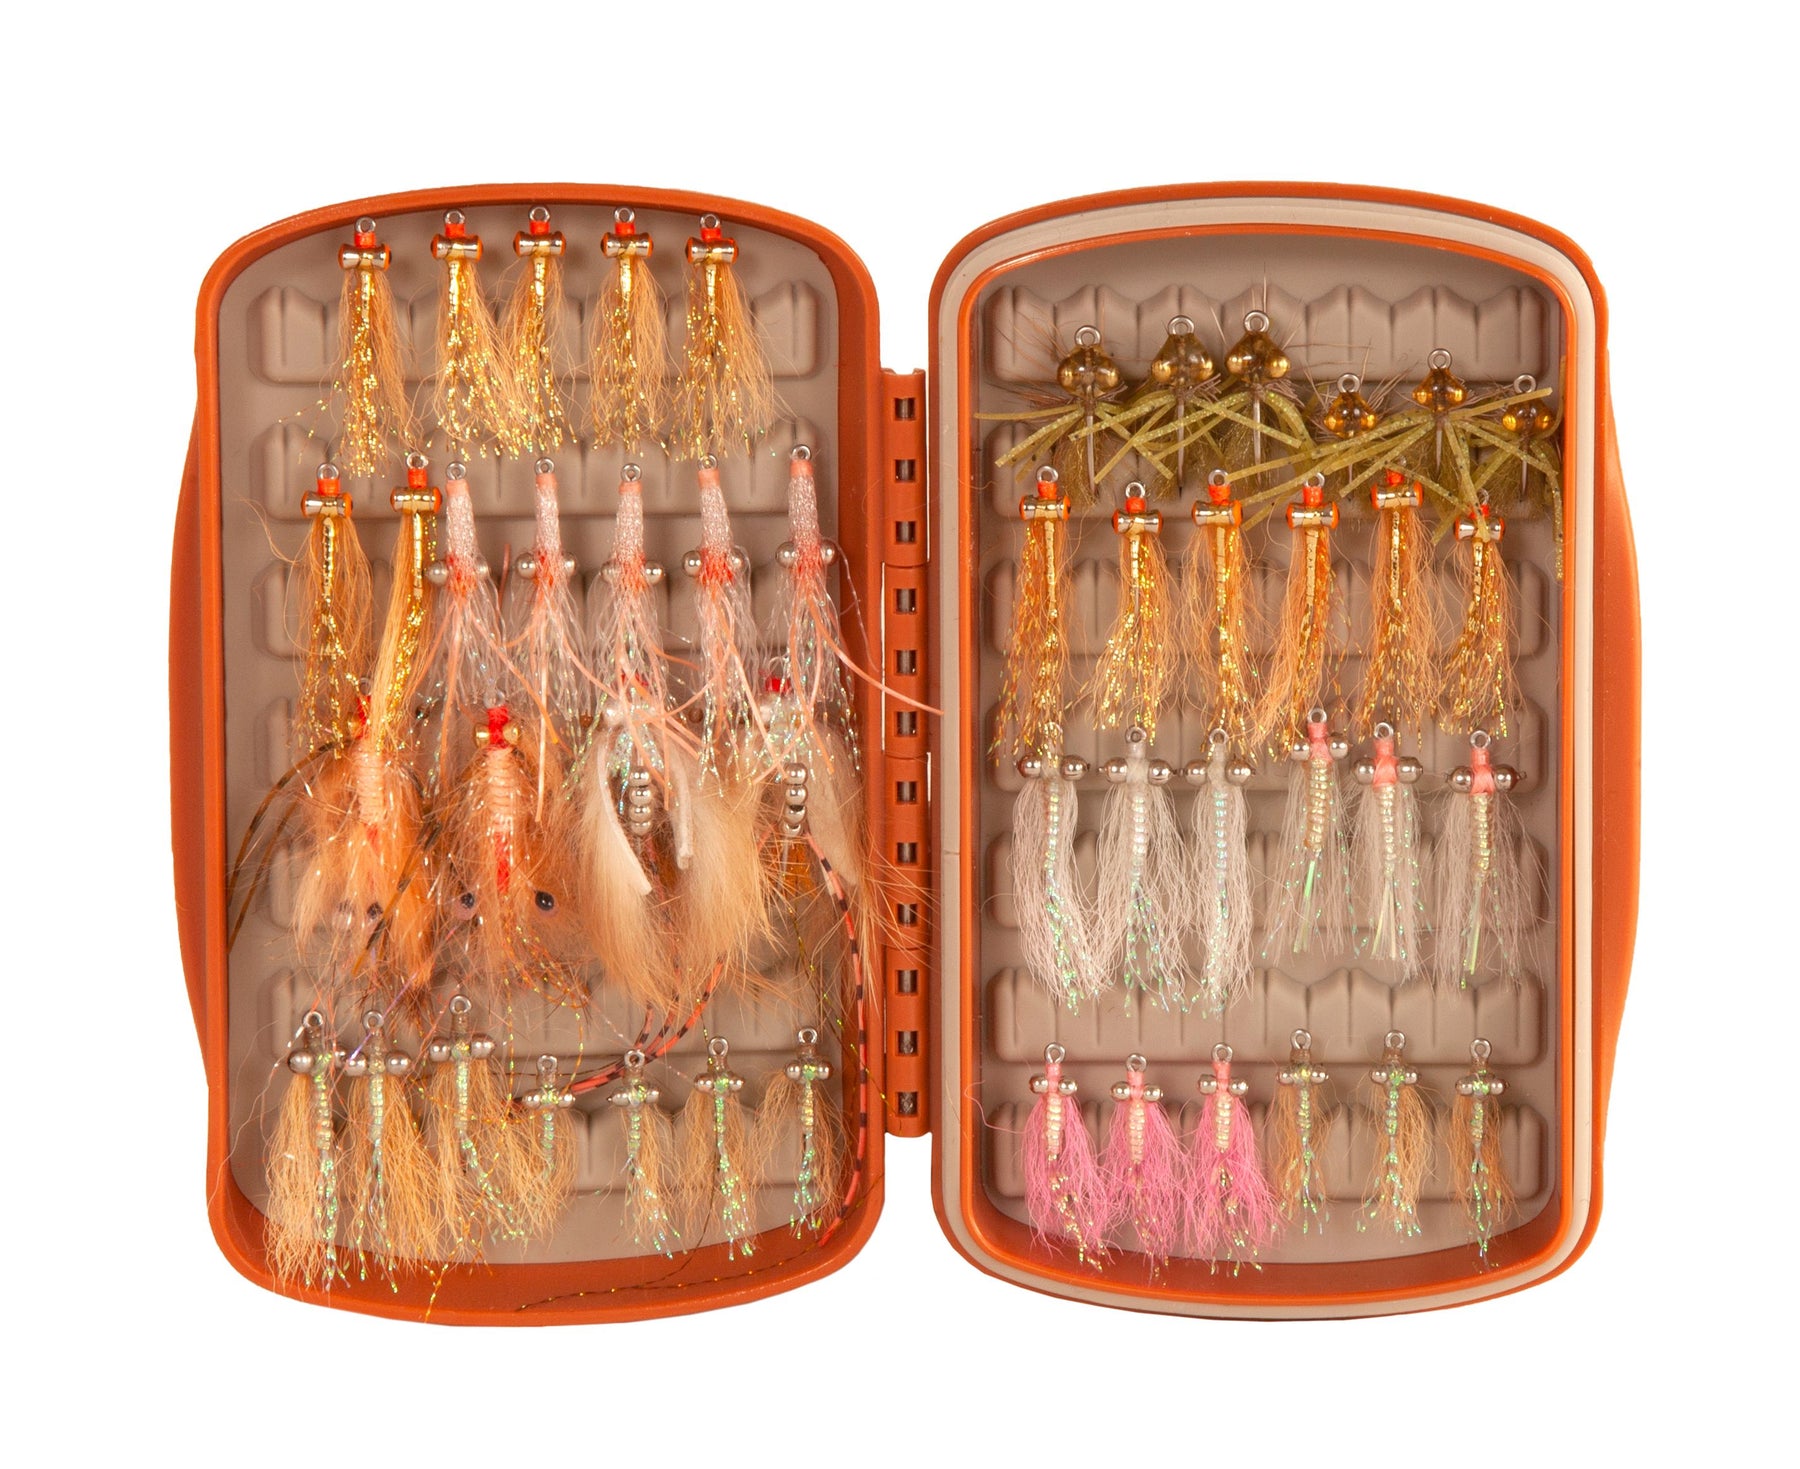  FishPond - Fly Boxes / Fly Fishing Accessories: Sports